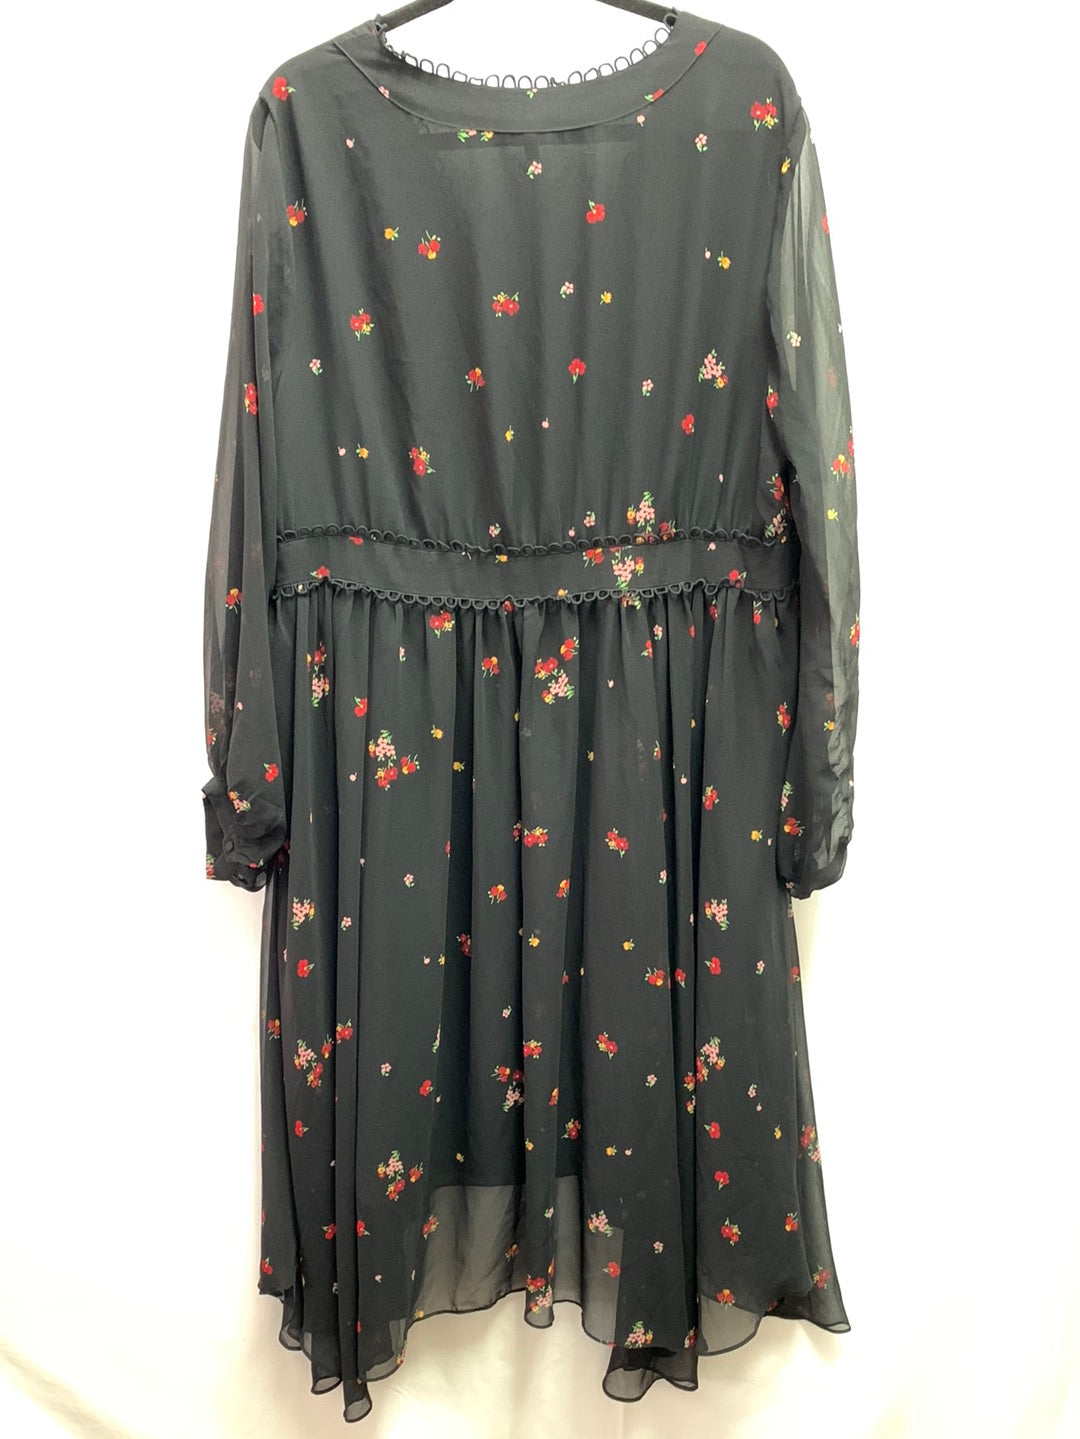 NWT - WHO WHAT WEAR black floral ditzy bouquet Sheer Midi Dress  - 1X